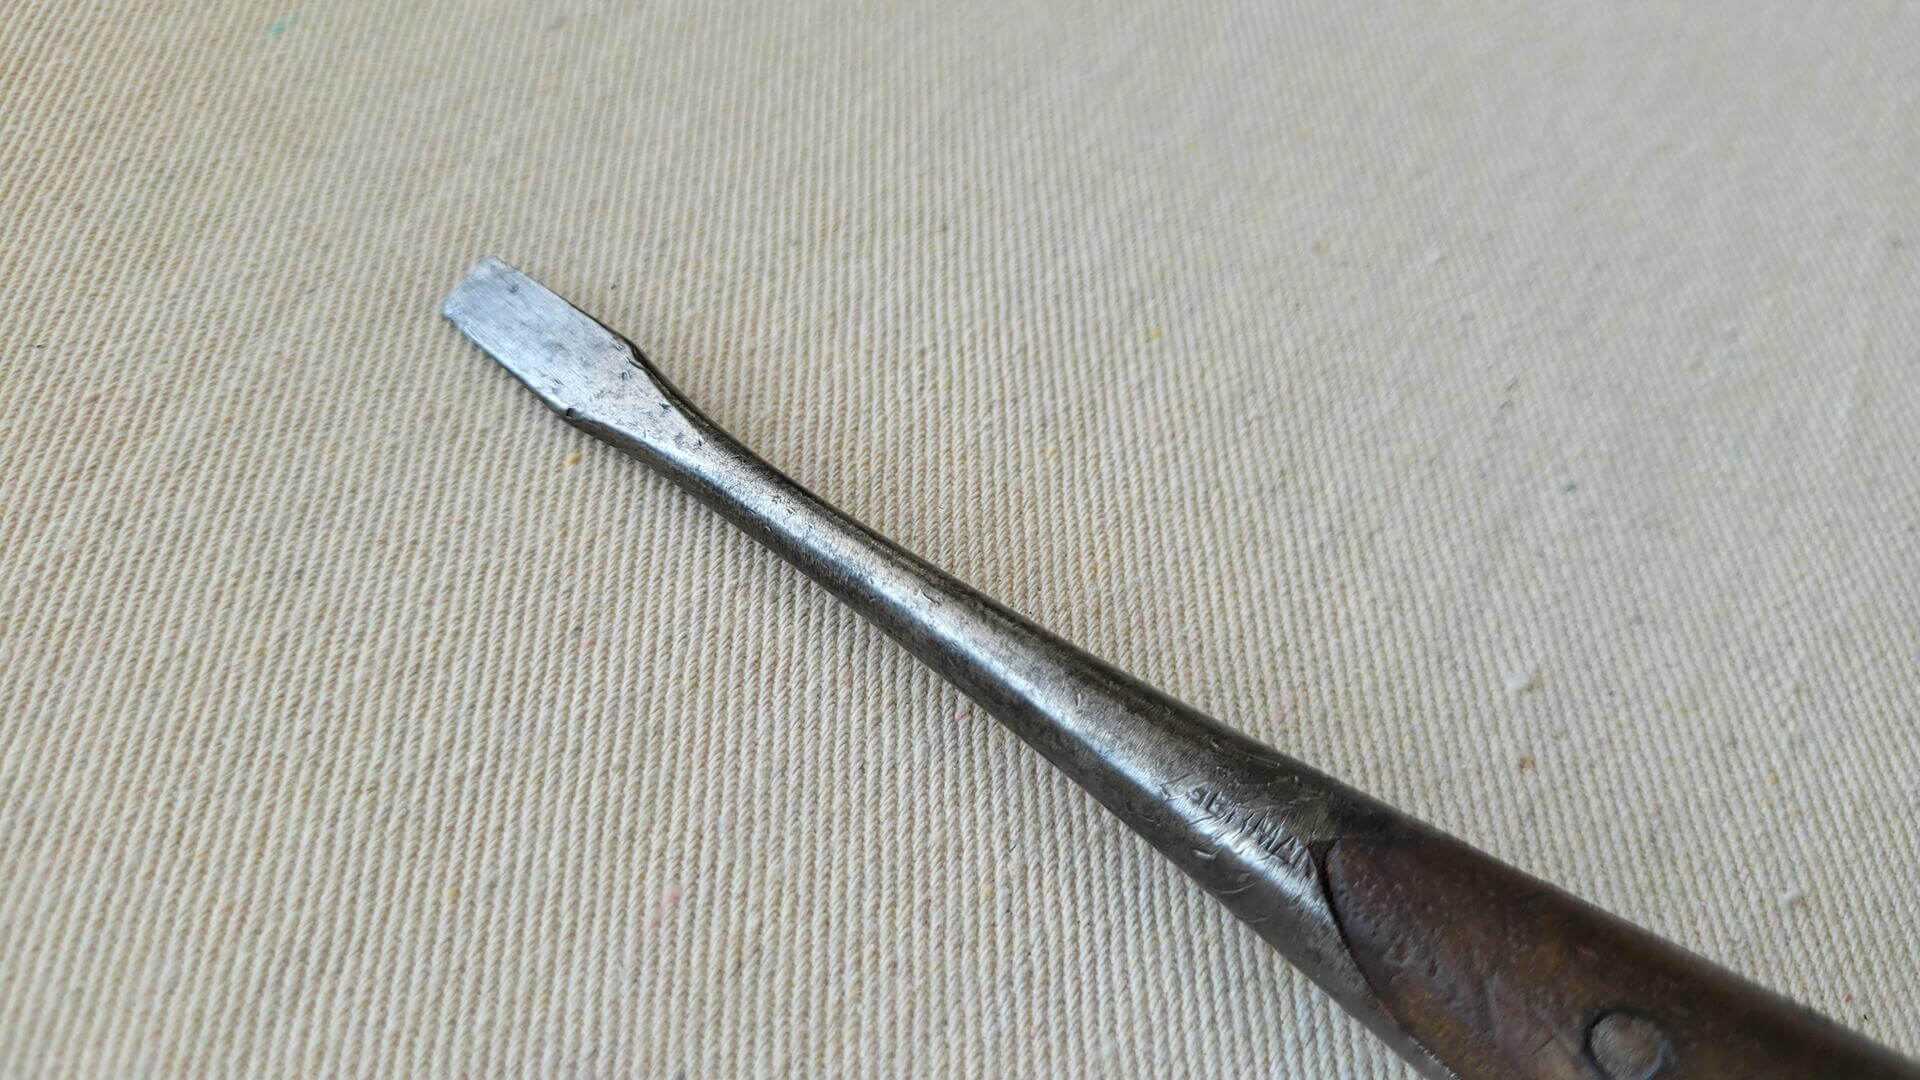 Beautiful vintage perfect handle flathead slotted screwdrivers 7 and 8 inches long. Antique made in Germany collectible carpentry hand tools